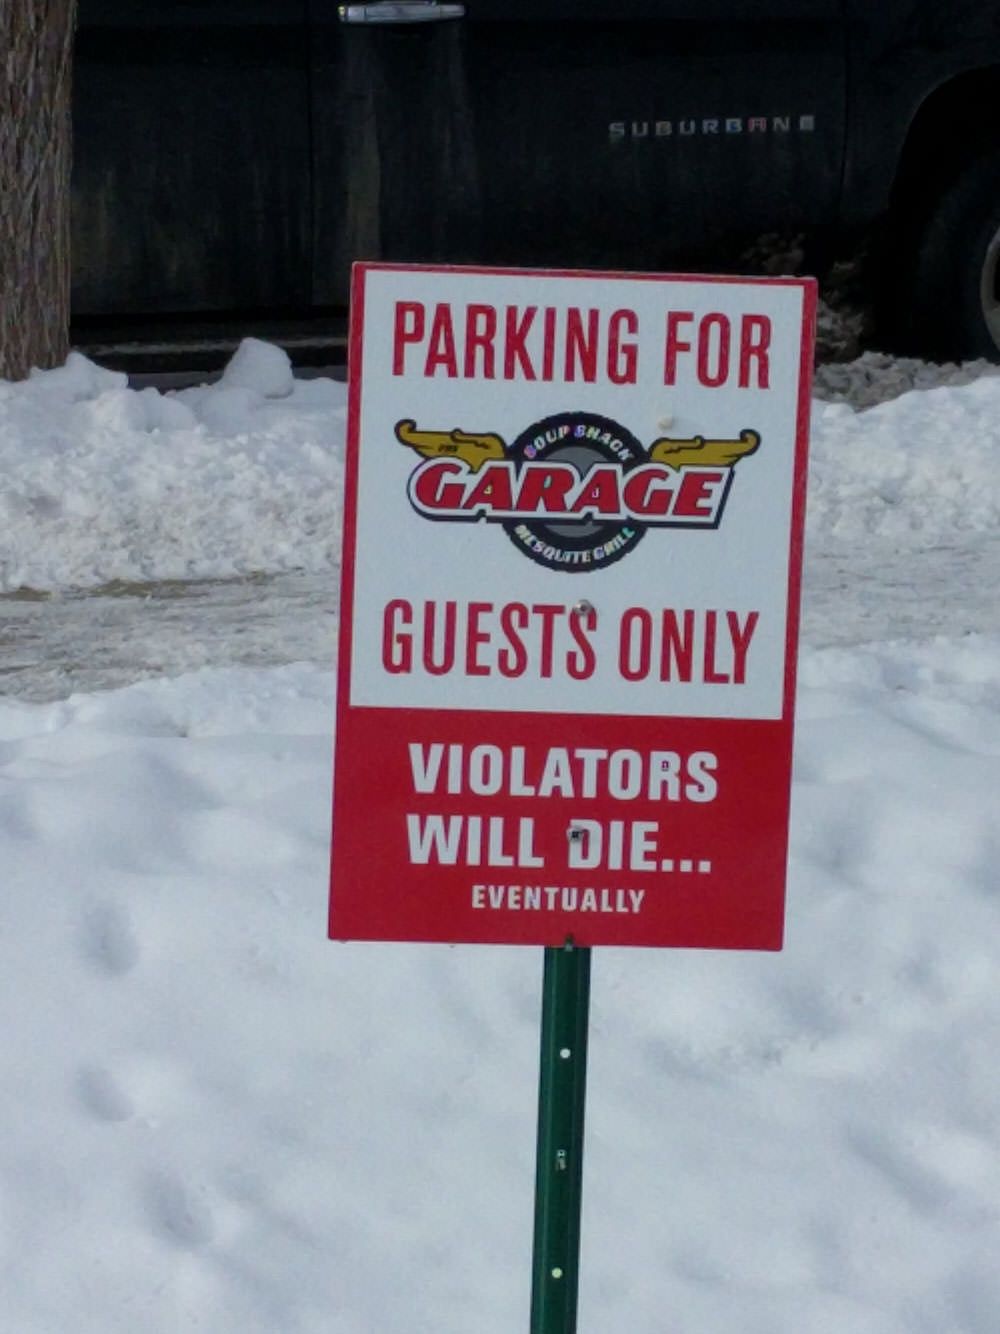 A local restaurant takes parking seriously